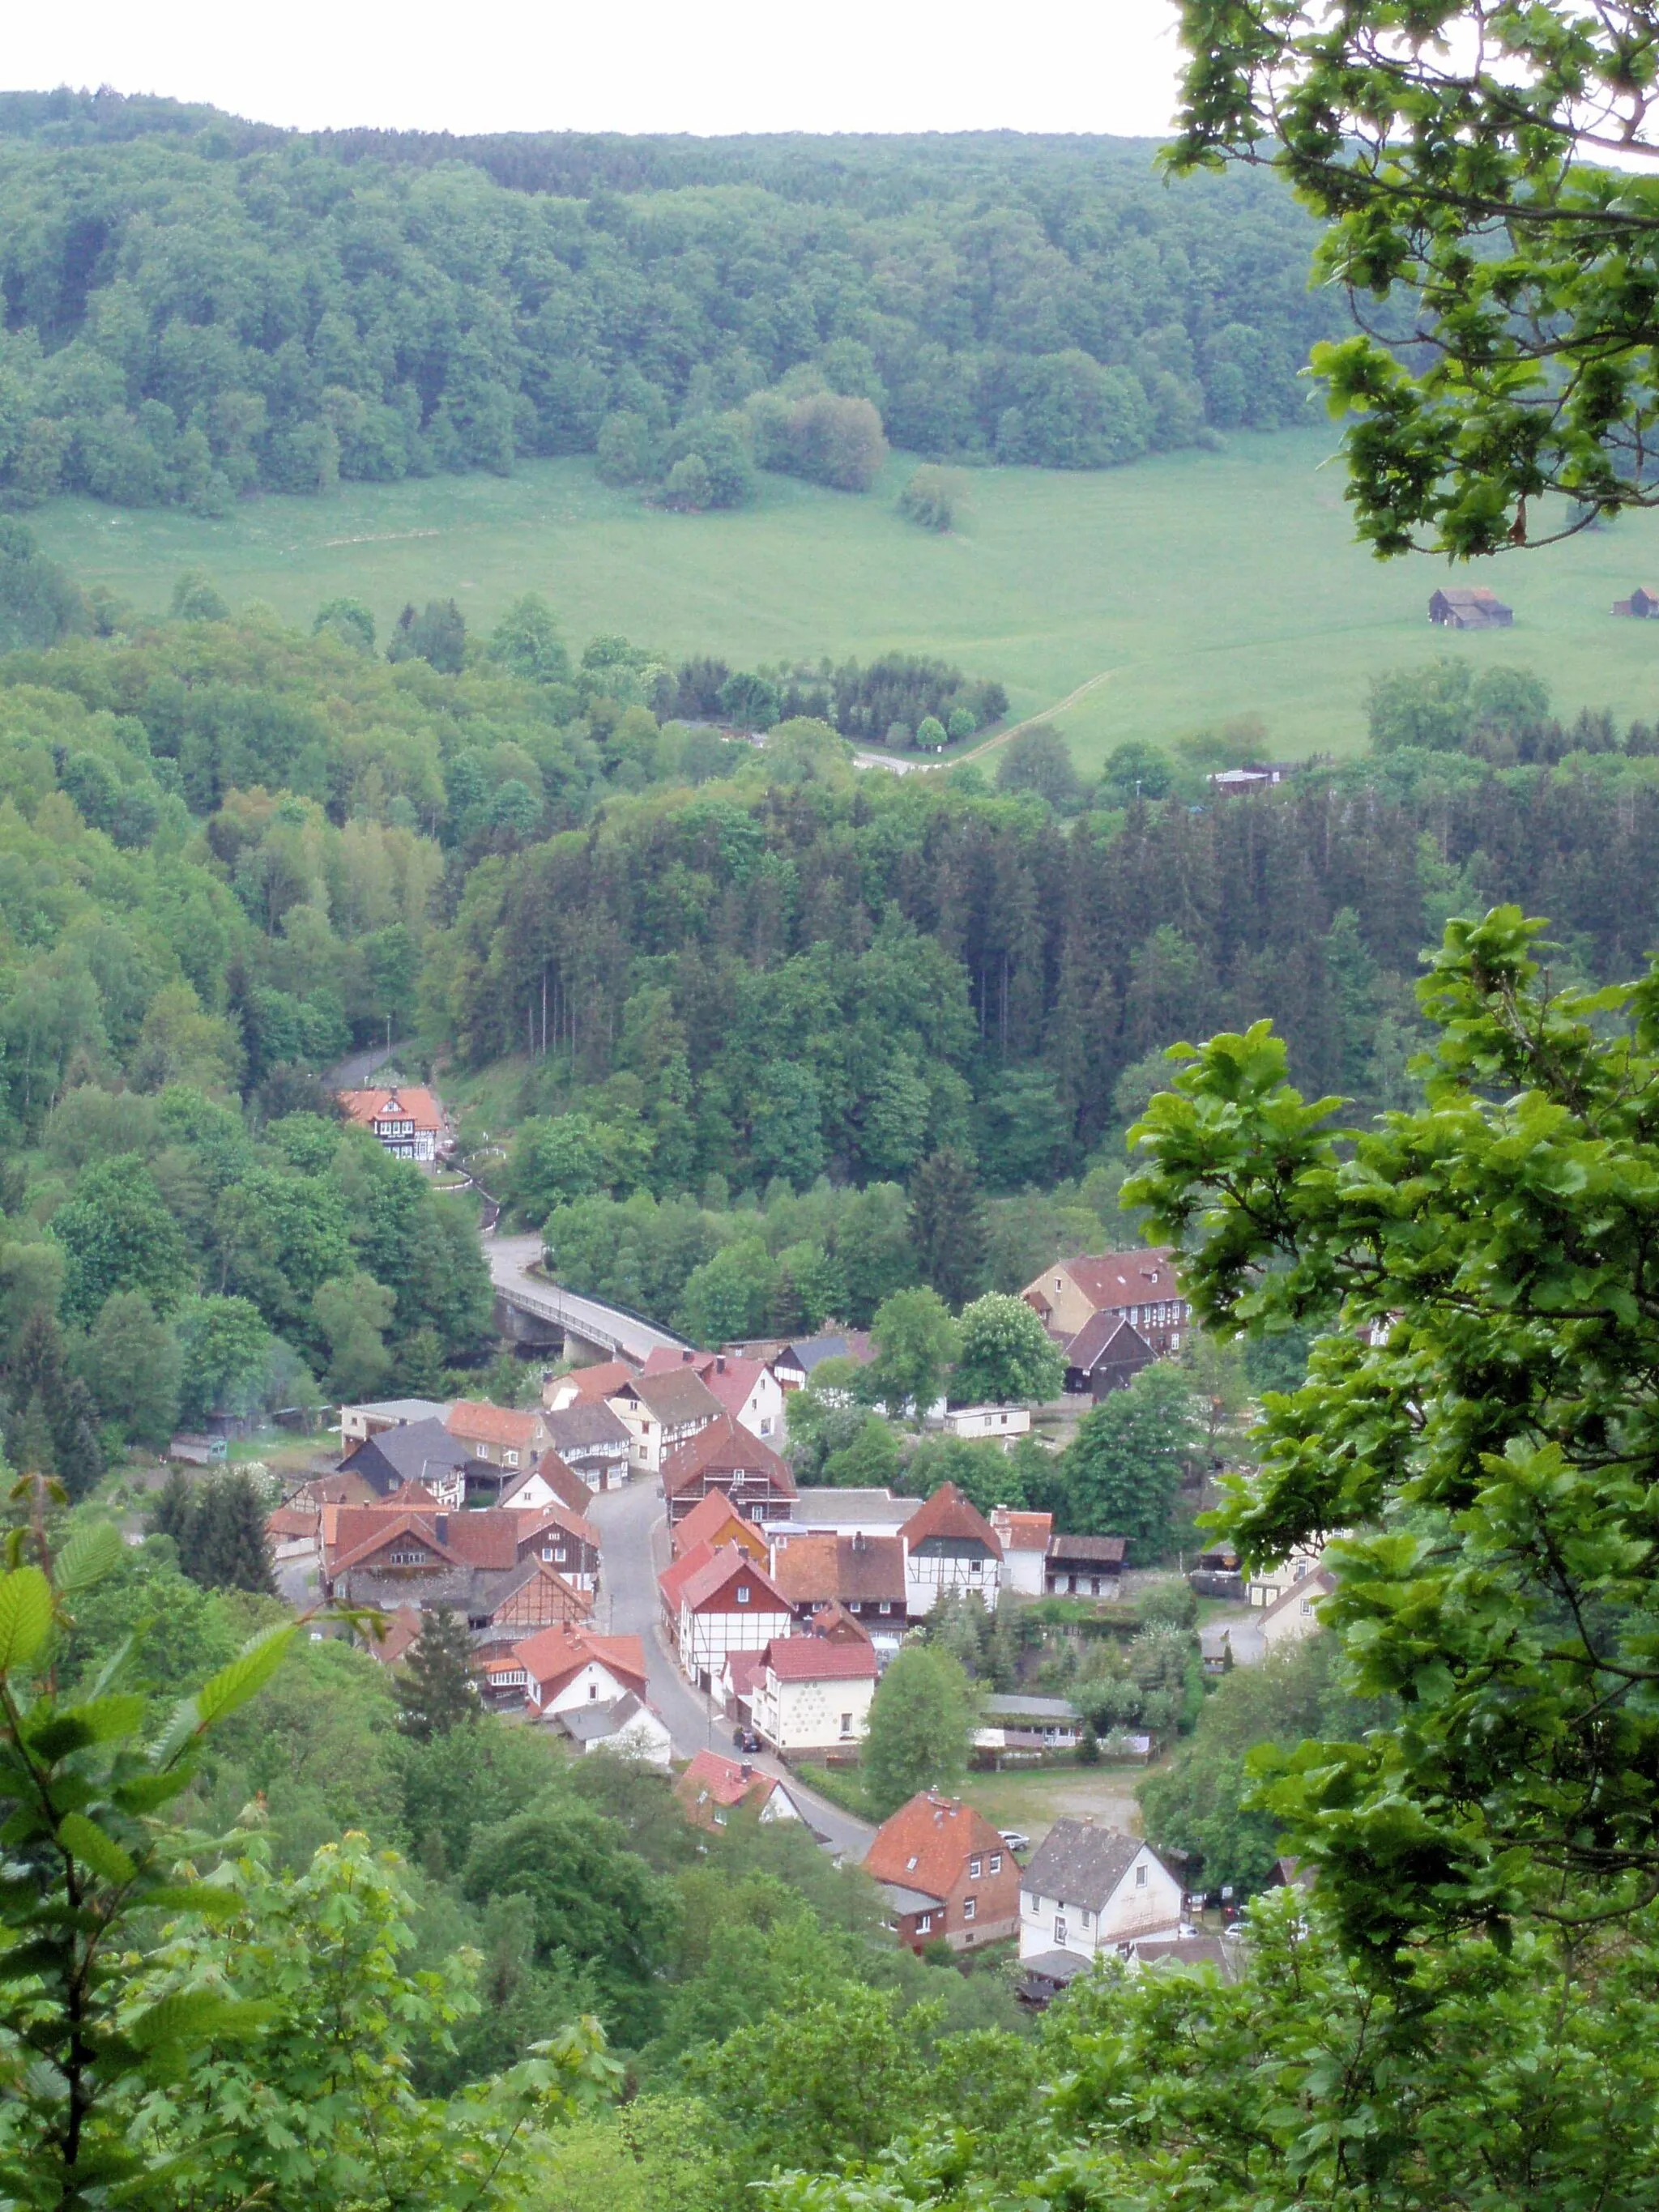 Photo showing: View from the Böser Kleef crags of the village of Altenbrak, Harz mountains, Germany